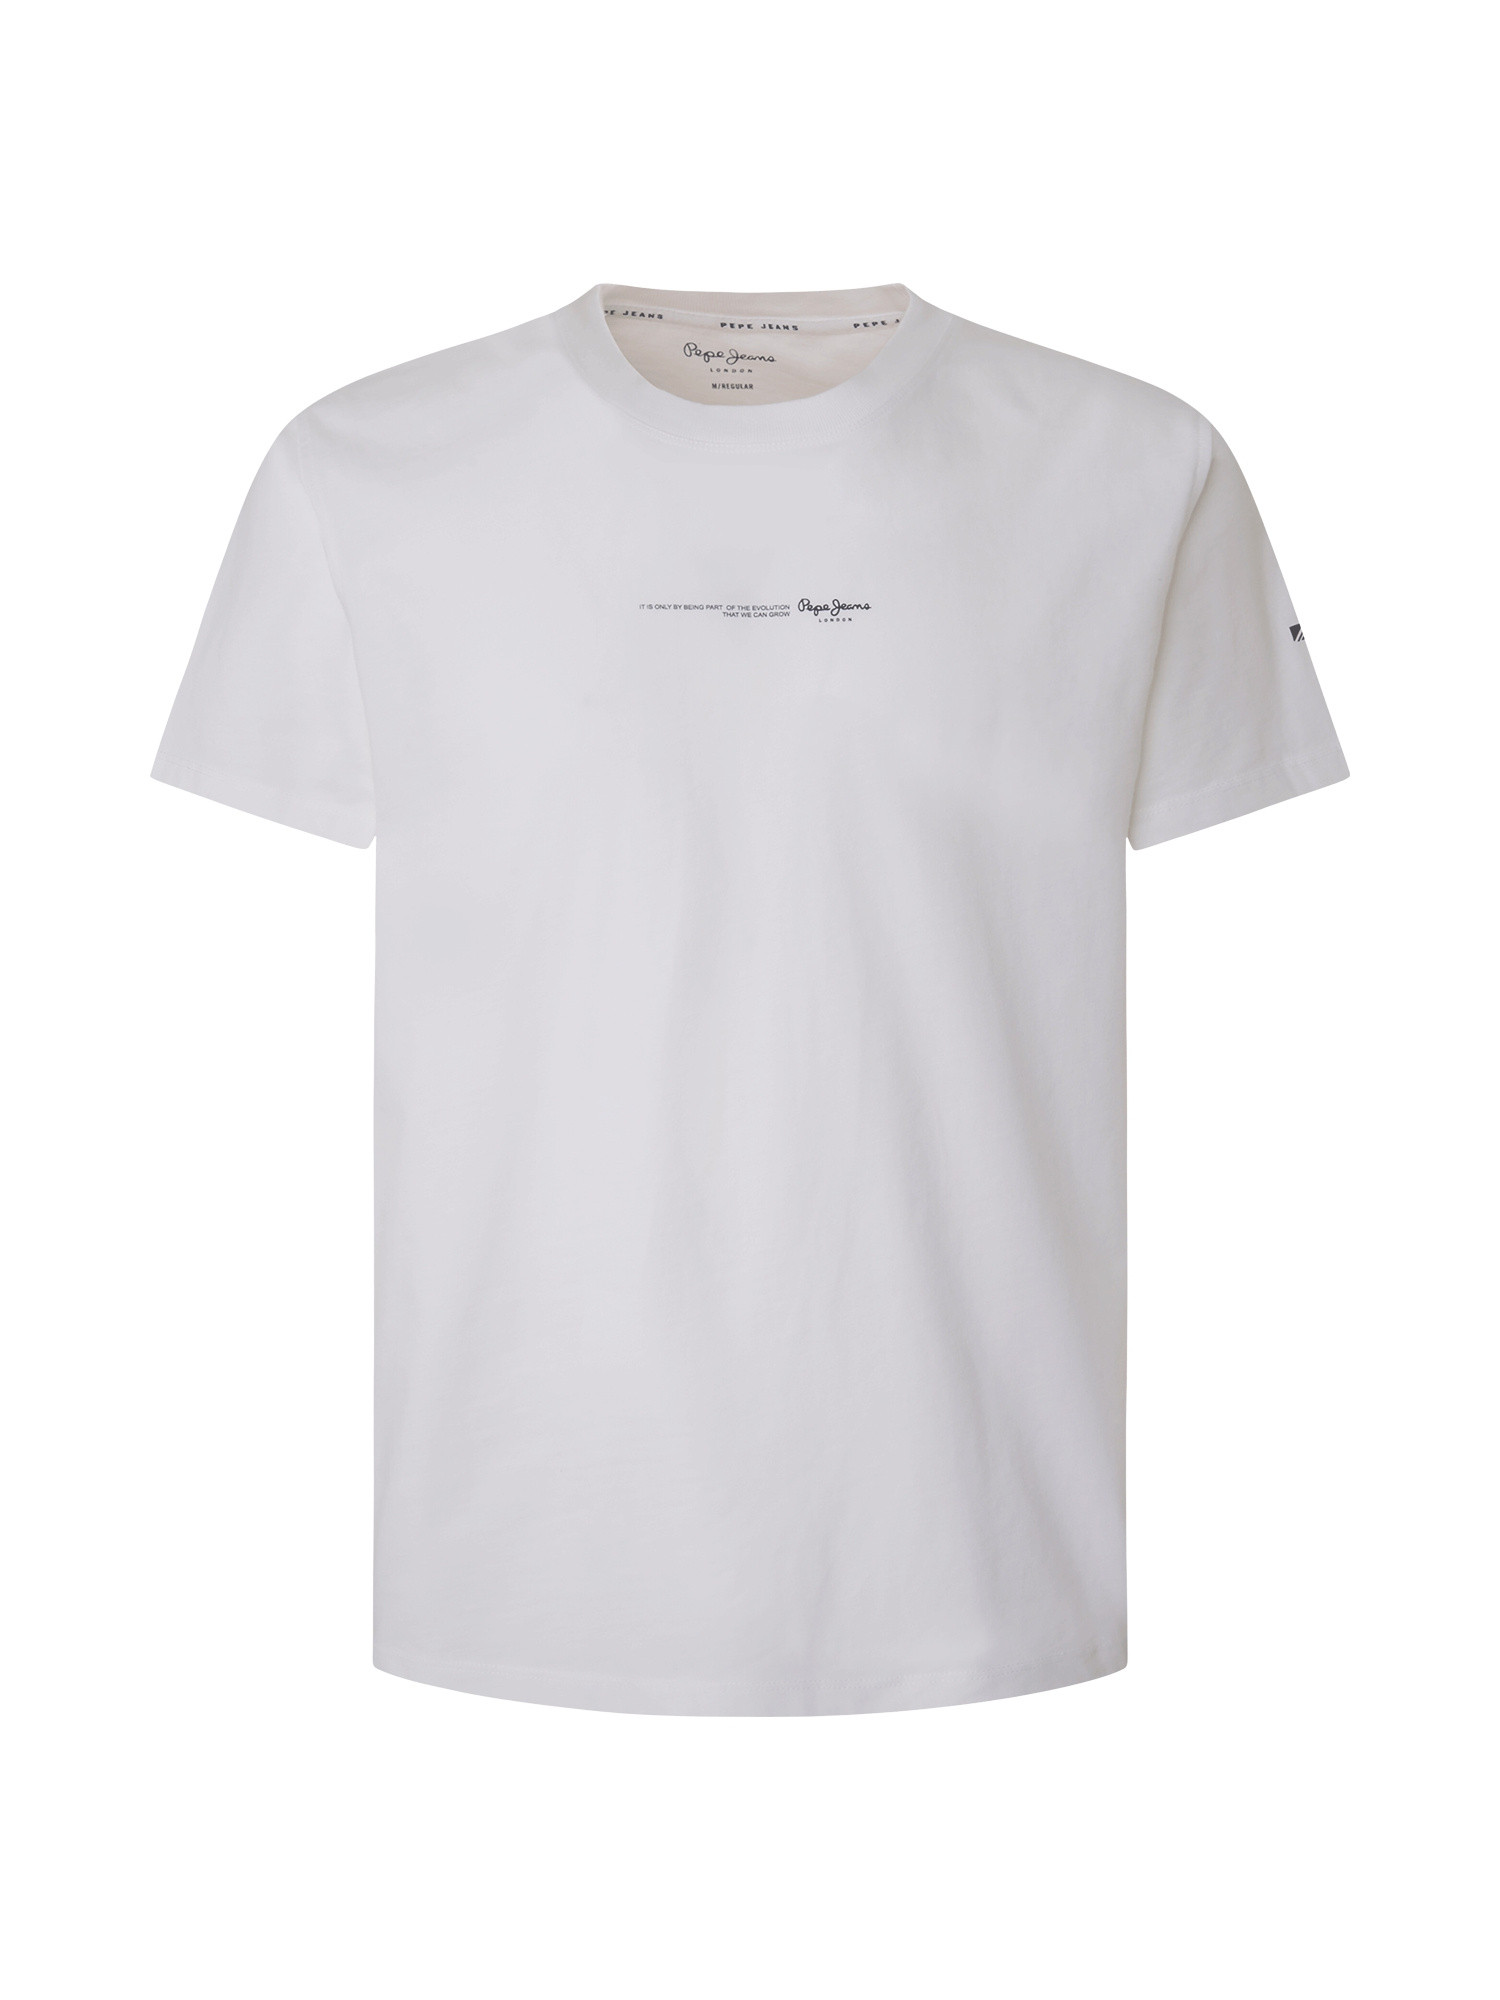 Pepe Jeans - Cotton T-shirt with lettering, White, large image number 0